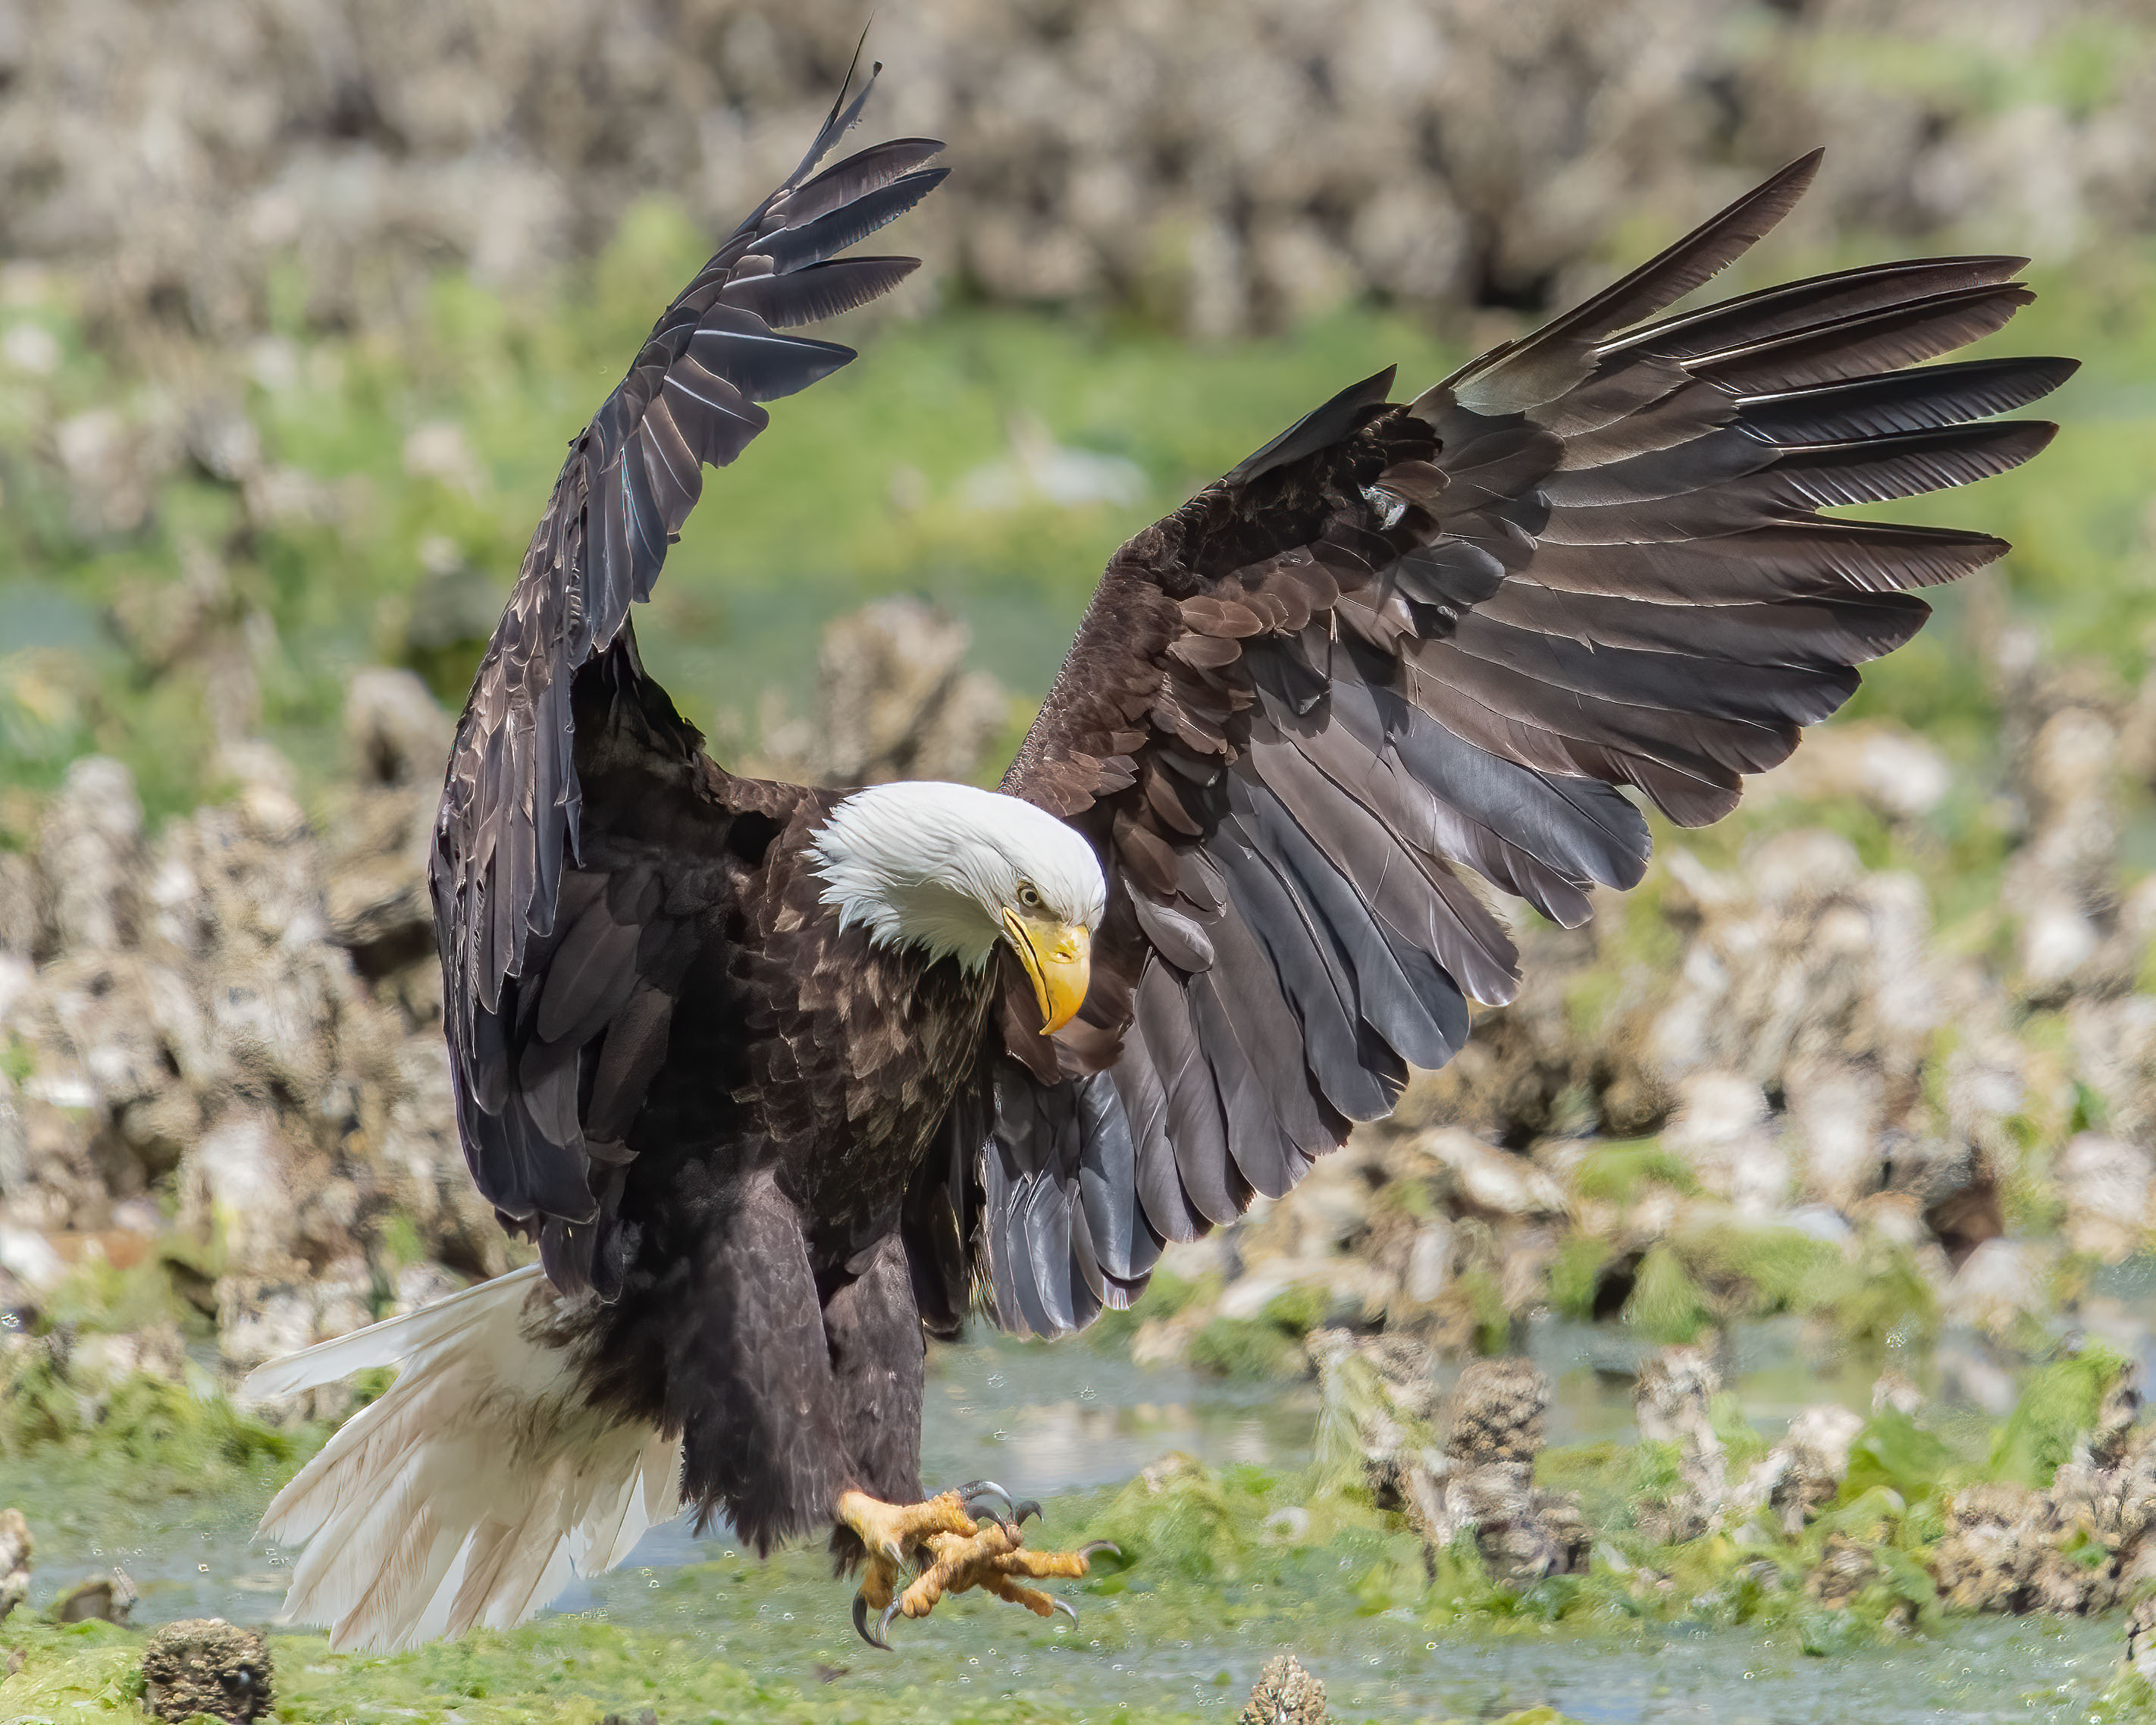 Pouncing Eagle by Bud Ralston